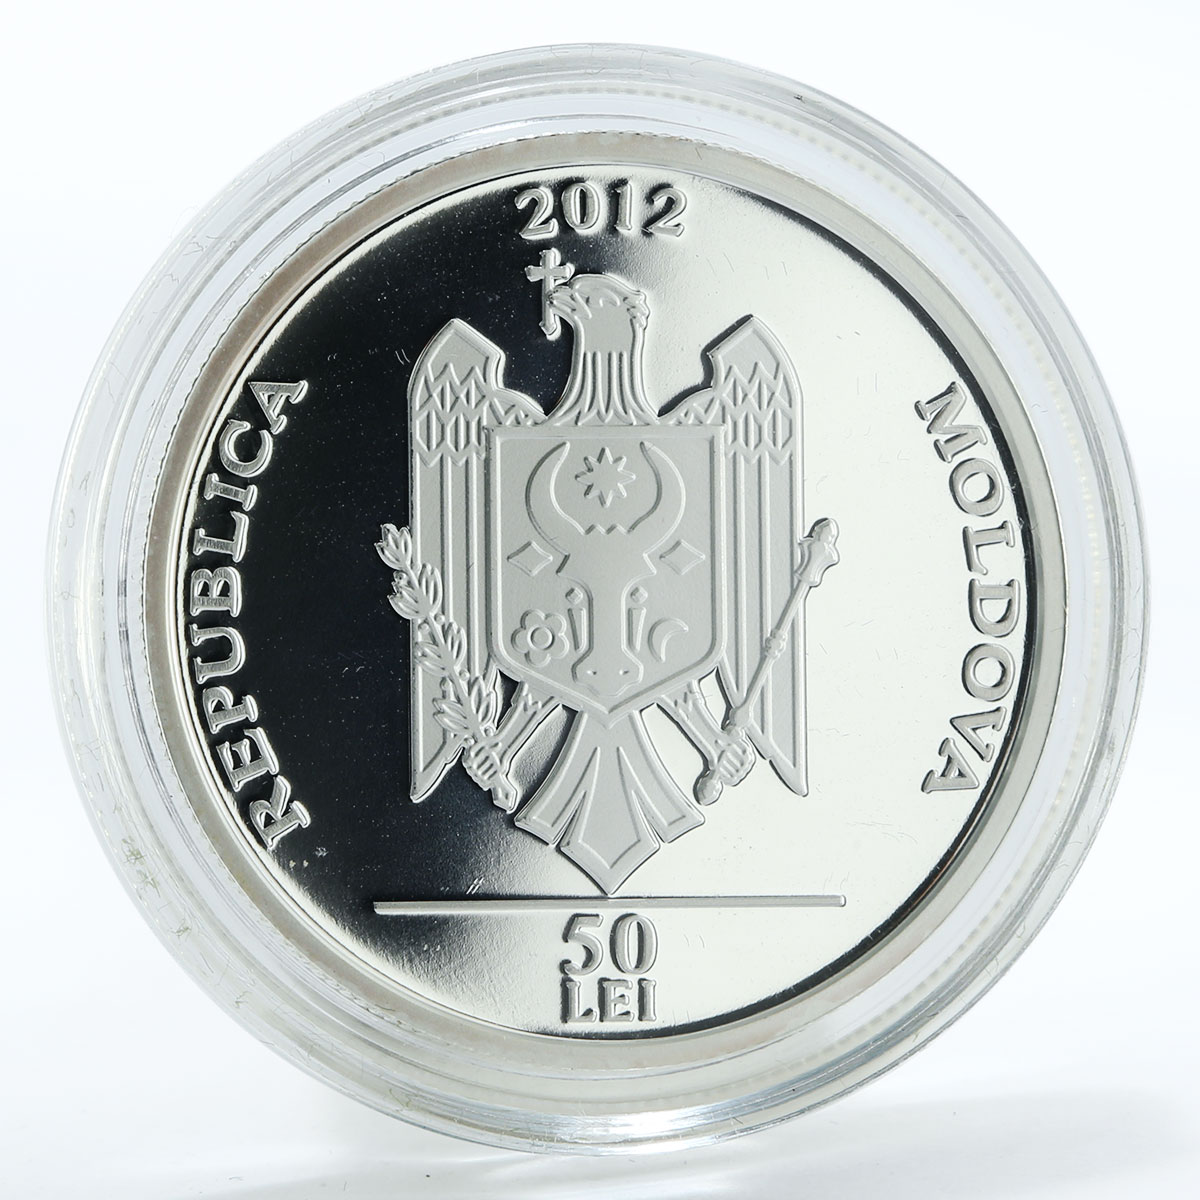 Moldova 50 lei Red Book Otter proof silver coin 2012